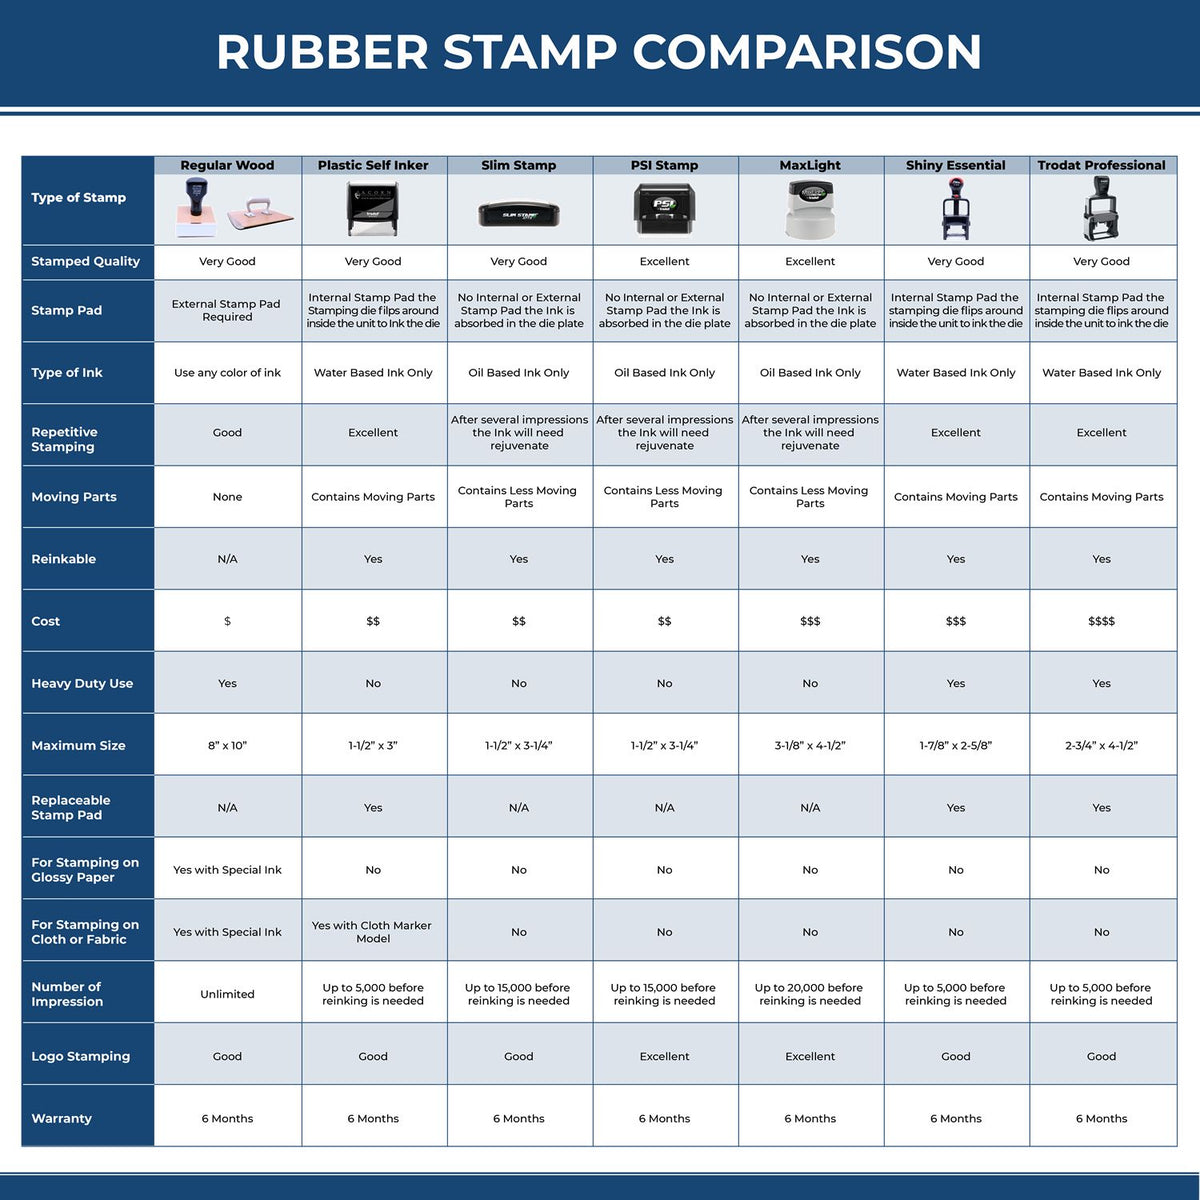 Managed Care Rubber Stamp 4224R Rubber Stamp Comparison